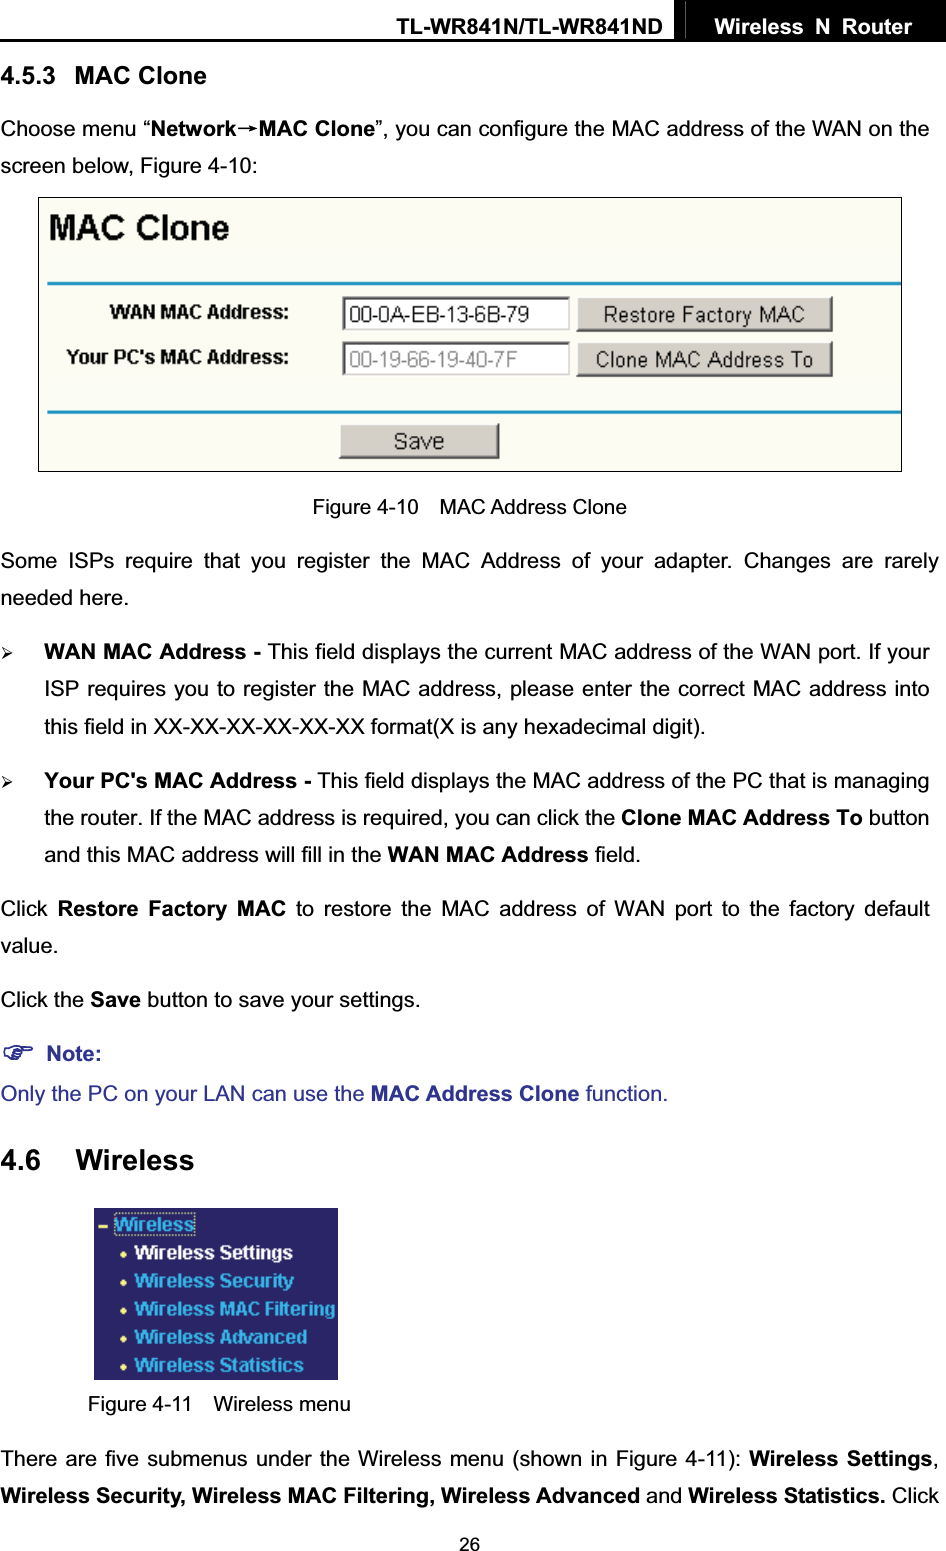 TL-WR841N/TL-WR841ND  Wireless N Router  264.5.3 MAC Clone Choose menu “NetworkėMAC Clone”, you can configure the MAC address of the WAN on the screen below, Figure 4-10: Figure 4-10  MAC Address CloneSome ISPs require that you register the MAC Address of your adapter. Changes are rarely needed here. ¾WAN MAC Address - This field displays the current MAC address of the WAN port. If your ISP requires you to register the MAC address, please enter the correct MAC address into this field in XX-XX-XX-XX-XX-XX format(X is any hexadecimal digit).   ¾Your PC&apos;s MAC Address - This field displays the MAC address of the PC that is managing the router. If the MAC address is required, you can click the Clone MAC Address To button and this MAC address will fill in the WAN MAC Address field. Click Restore Factory MAC to restore the MAC address of WAN port to the factory default value.Click the Save button to save your settings. )Note:Only the PC on your LAN can use the MAC Address Clone function. 4.6 Wireless Figure 4-11  Wireless menu There are five submenus under the Wireless menu (shown in Figure 4-11): Wireless Settings,Wireless Security, Wireless MAC Filtering, Wireless Advanced and Wireless Statistics. Click